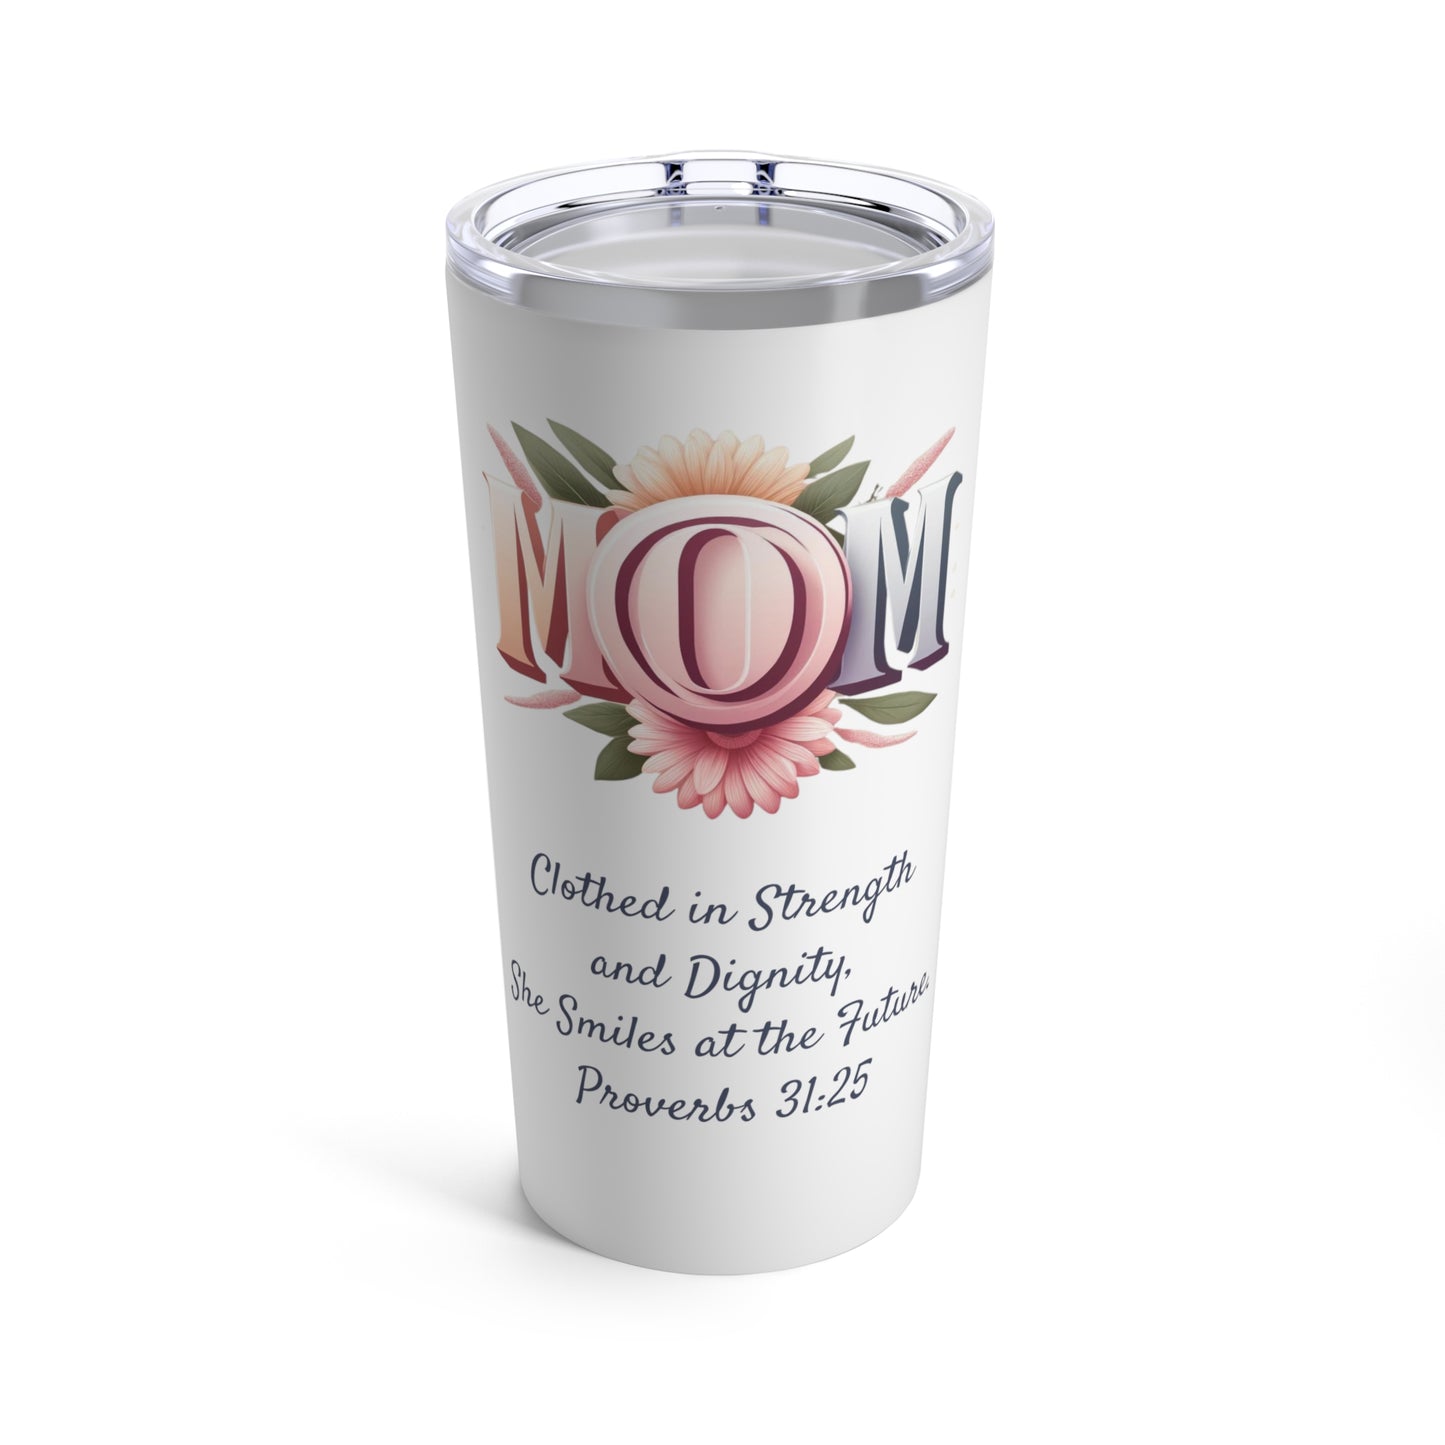 Proverbs 31:2 Double-Wall Insulated Tumbler - Keep Your Faith & Beverages Hot or Cold, Joyous Life Journals